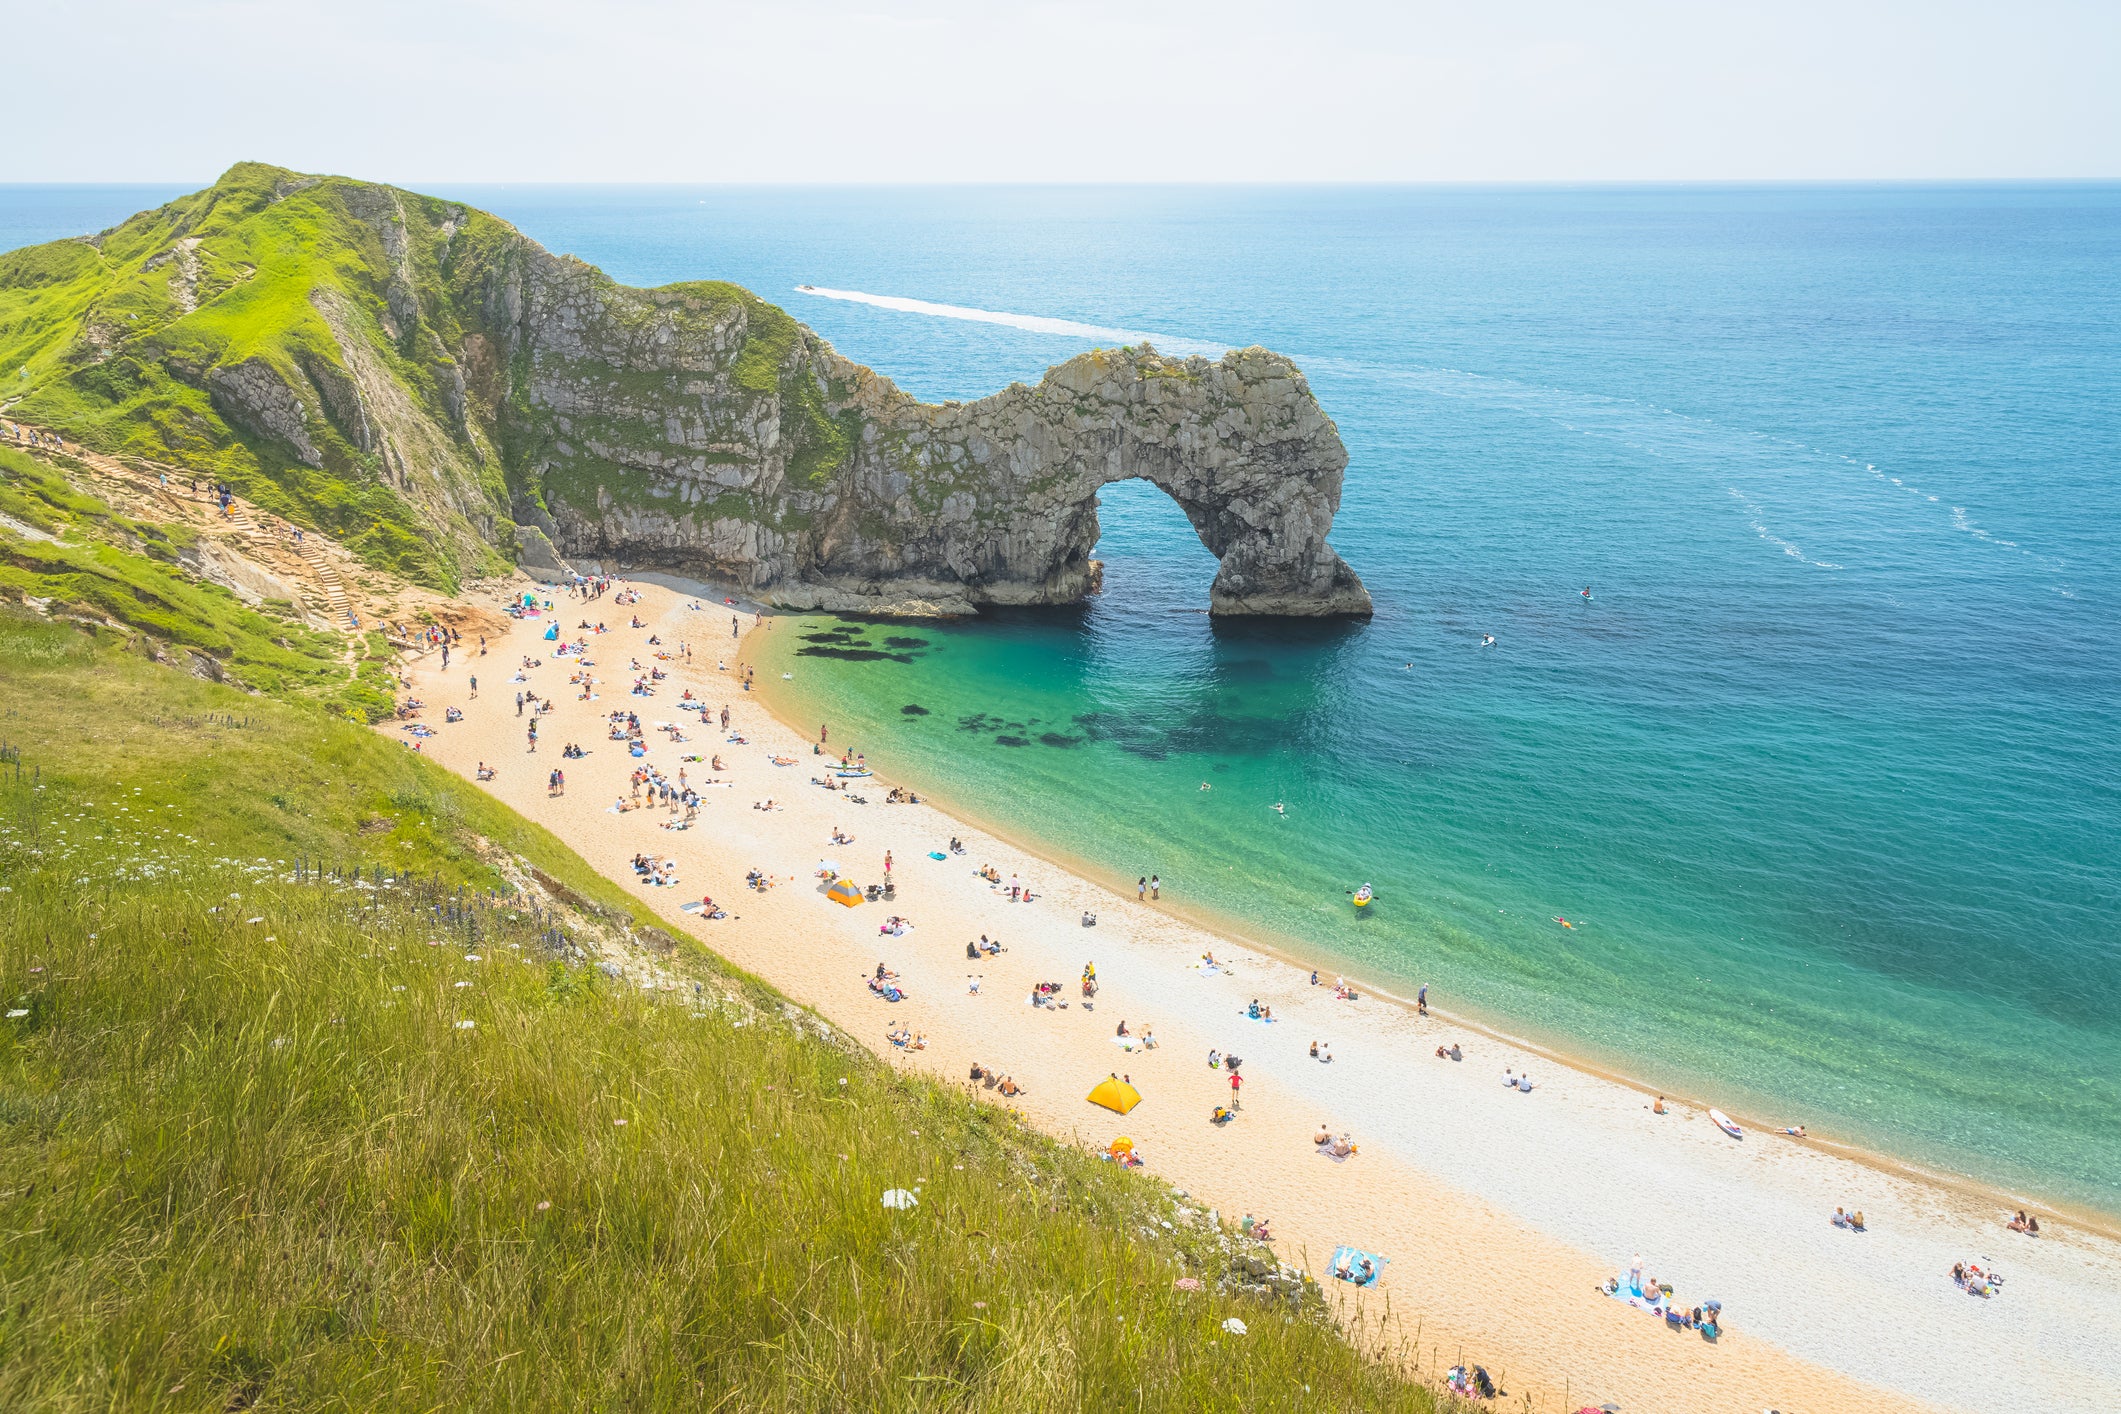 Durdle Door, with its iconic archway, is a great coastal spot for dogs